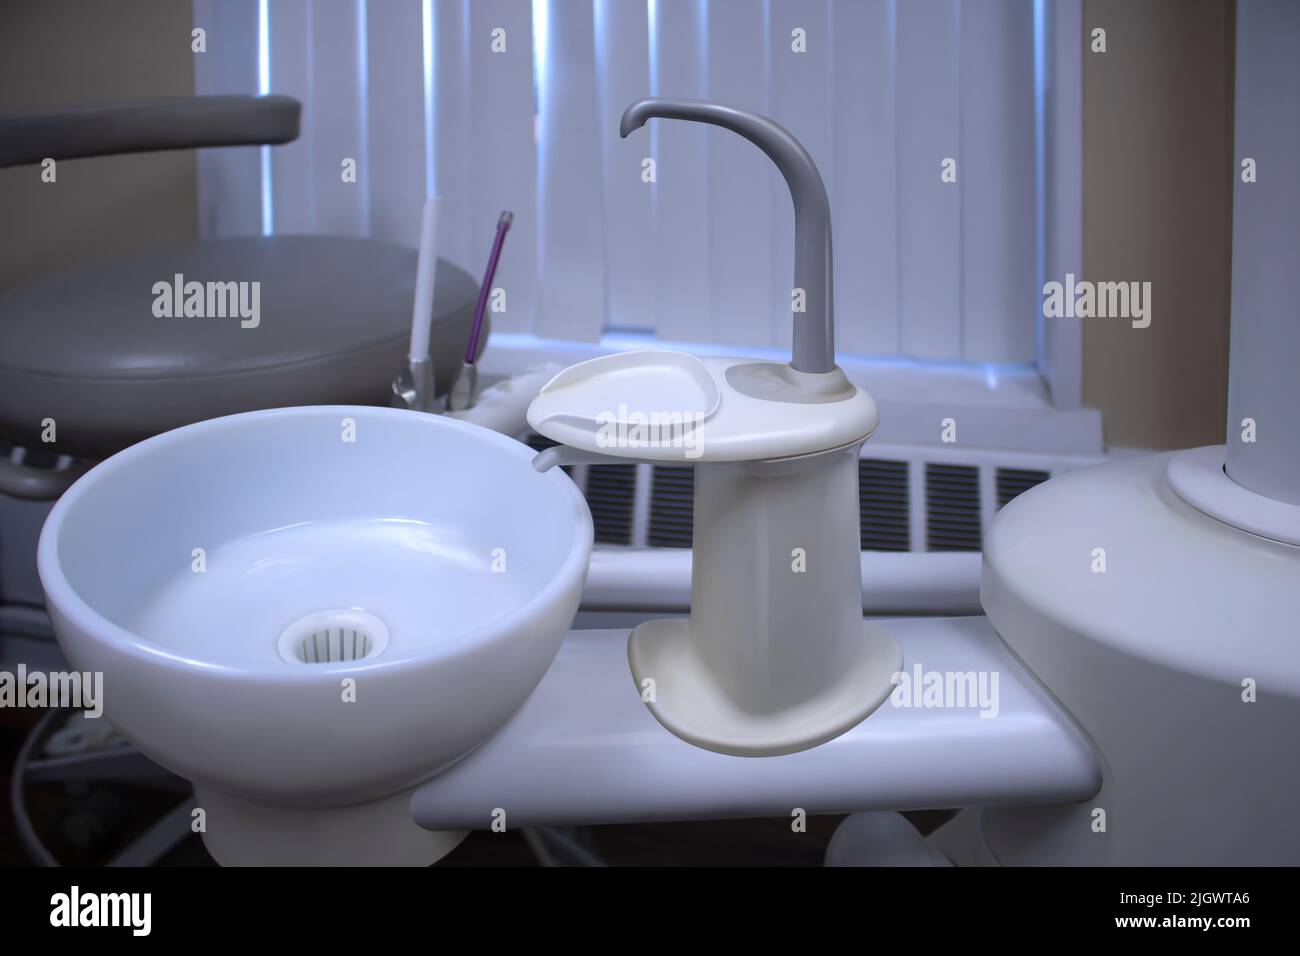 dentist's patient chair with rinsing station Sink for Medical equipment Stock Photo